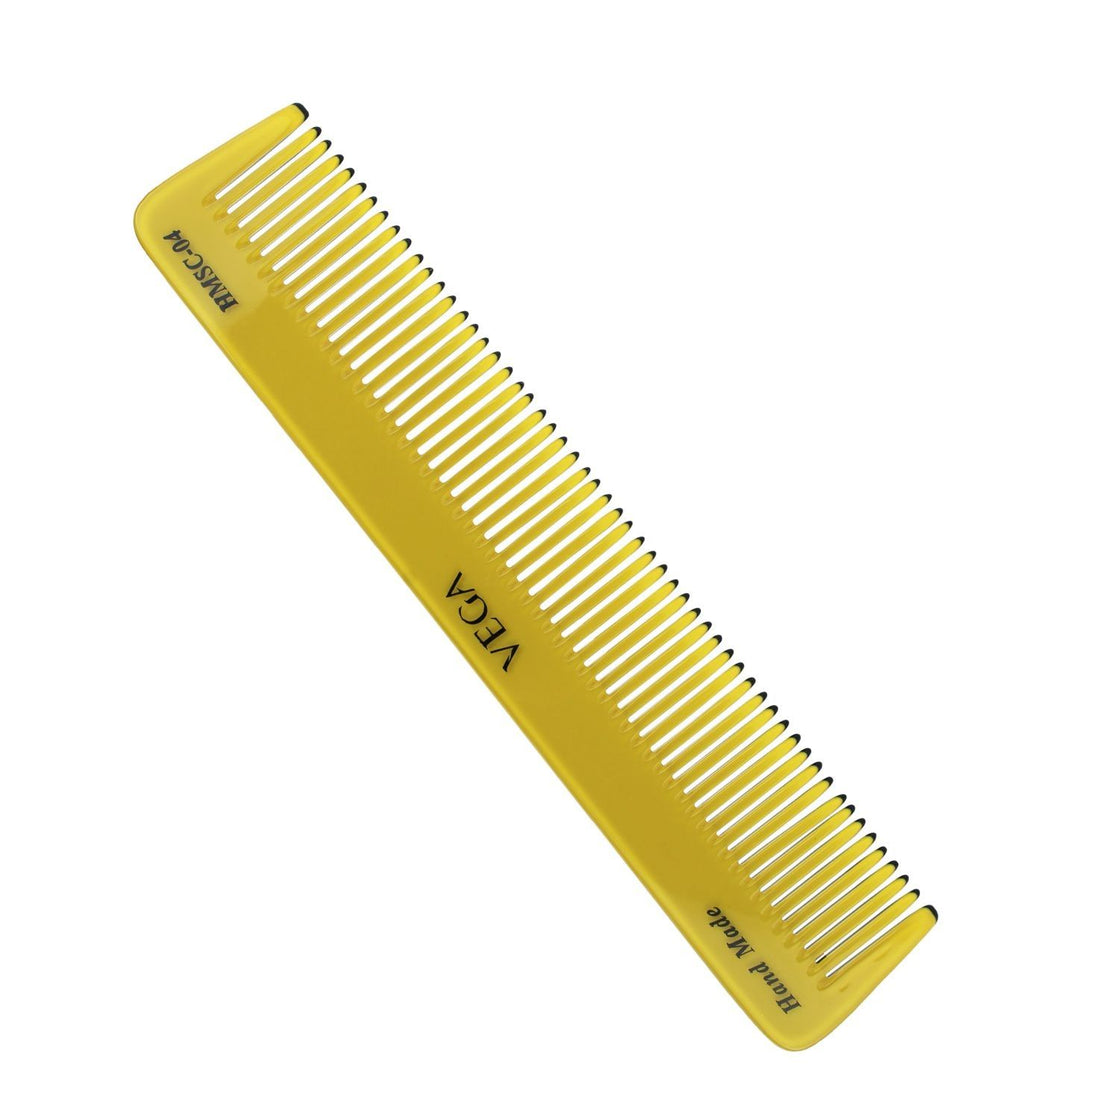 Vega Hmsc-04 Dual Color Comb (Color May Vary)-5